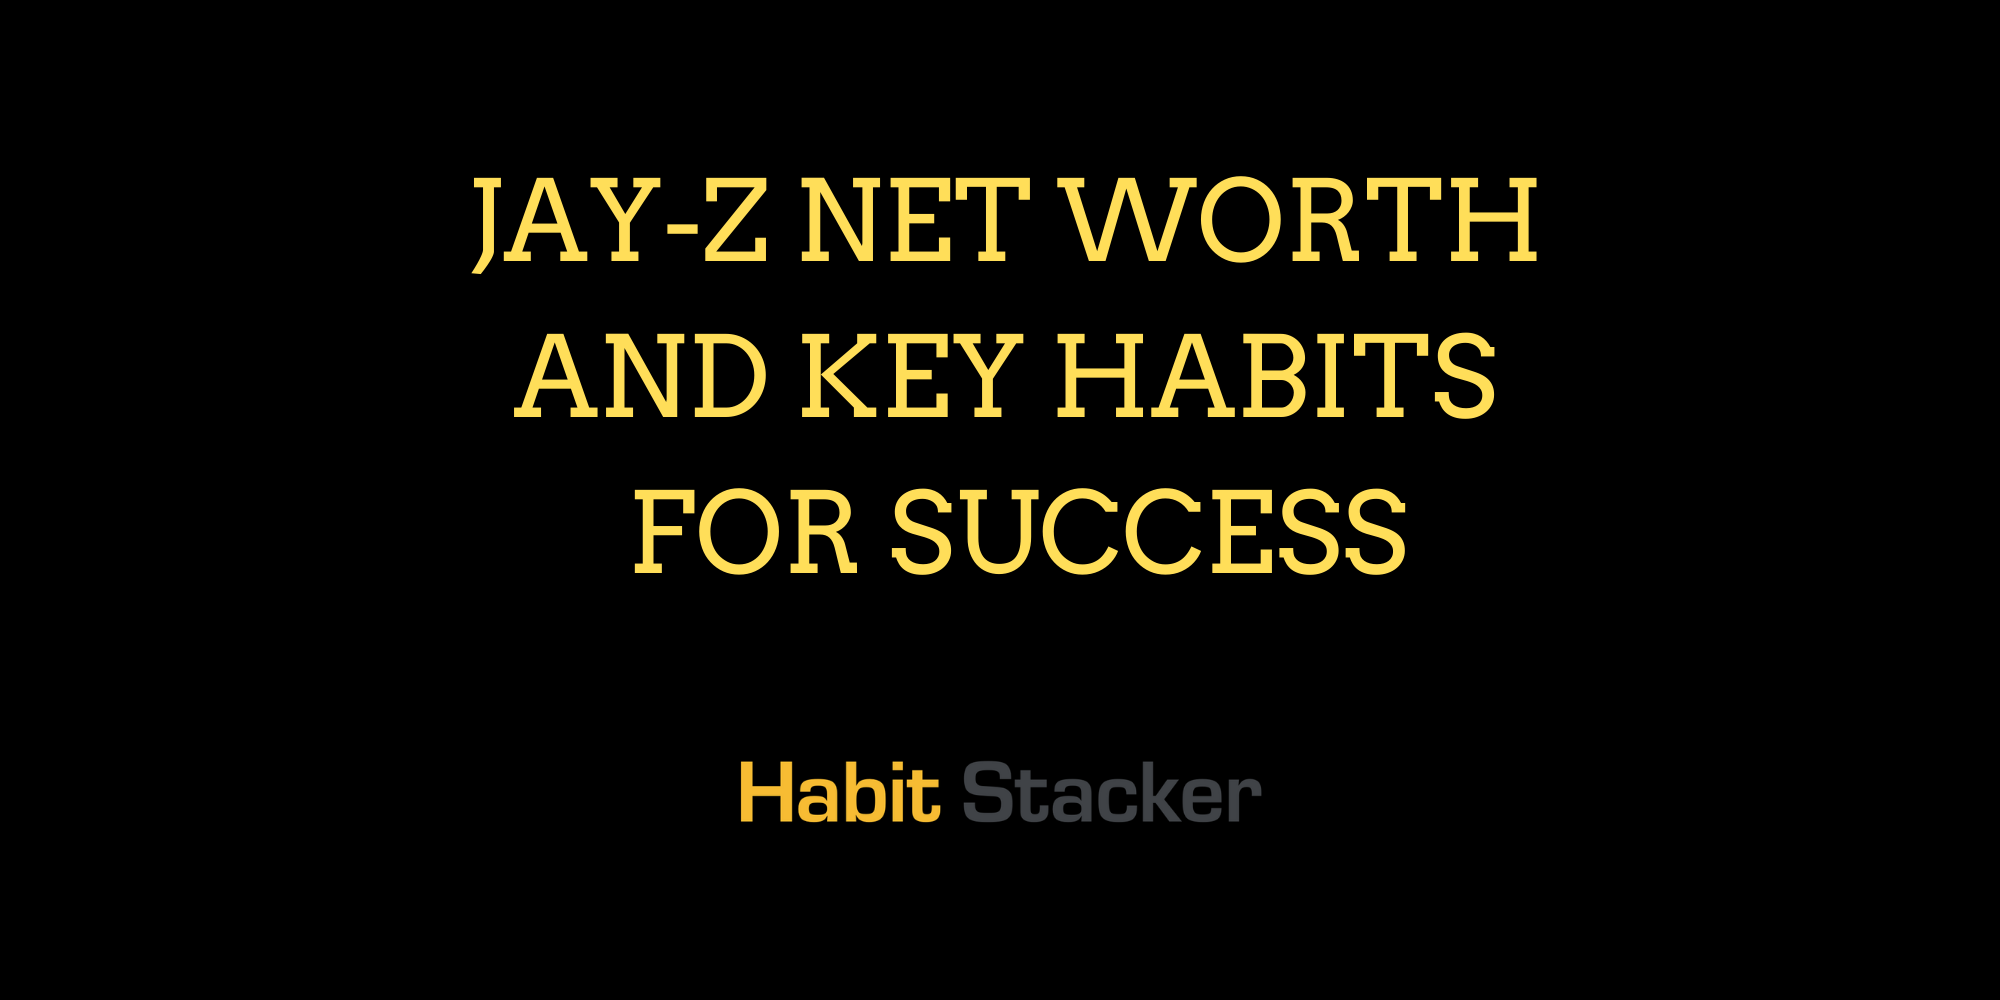 Jay-Z Net Worth and Key Habits for Success